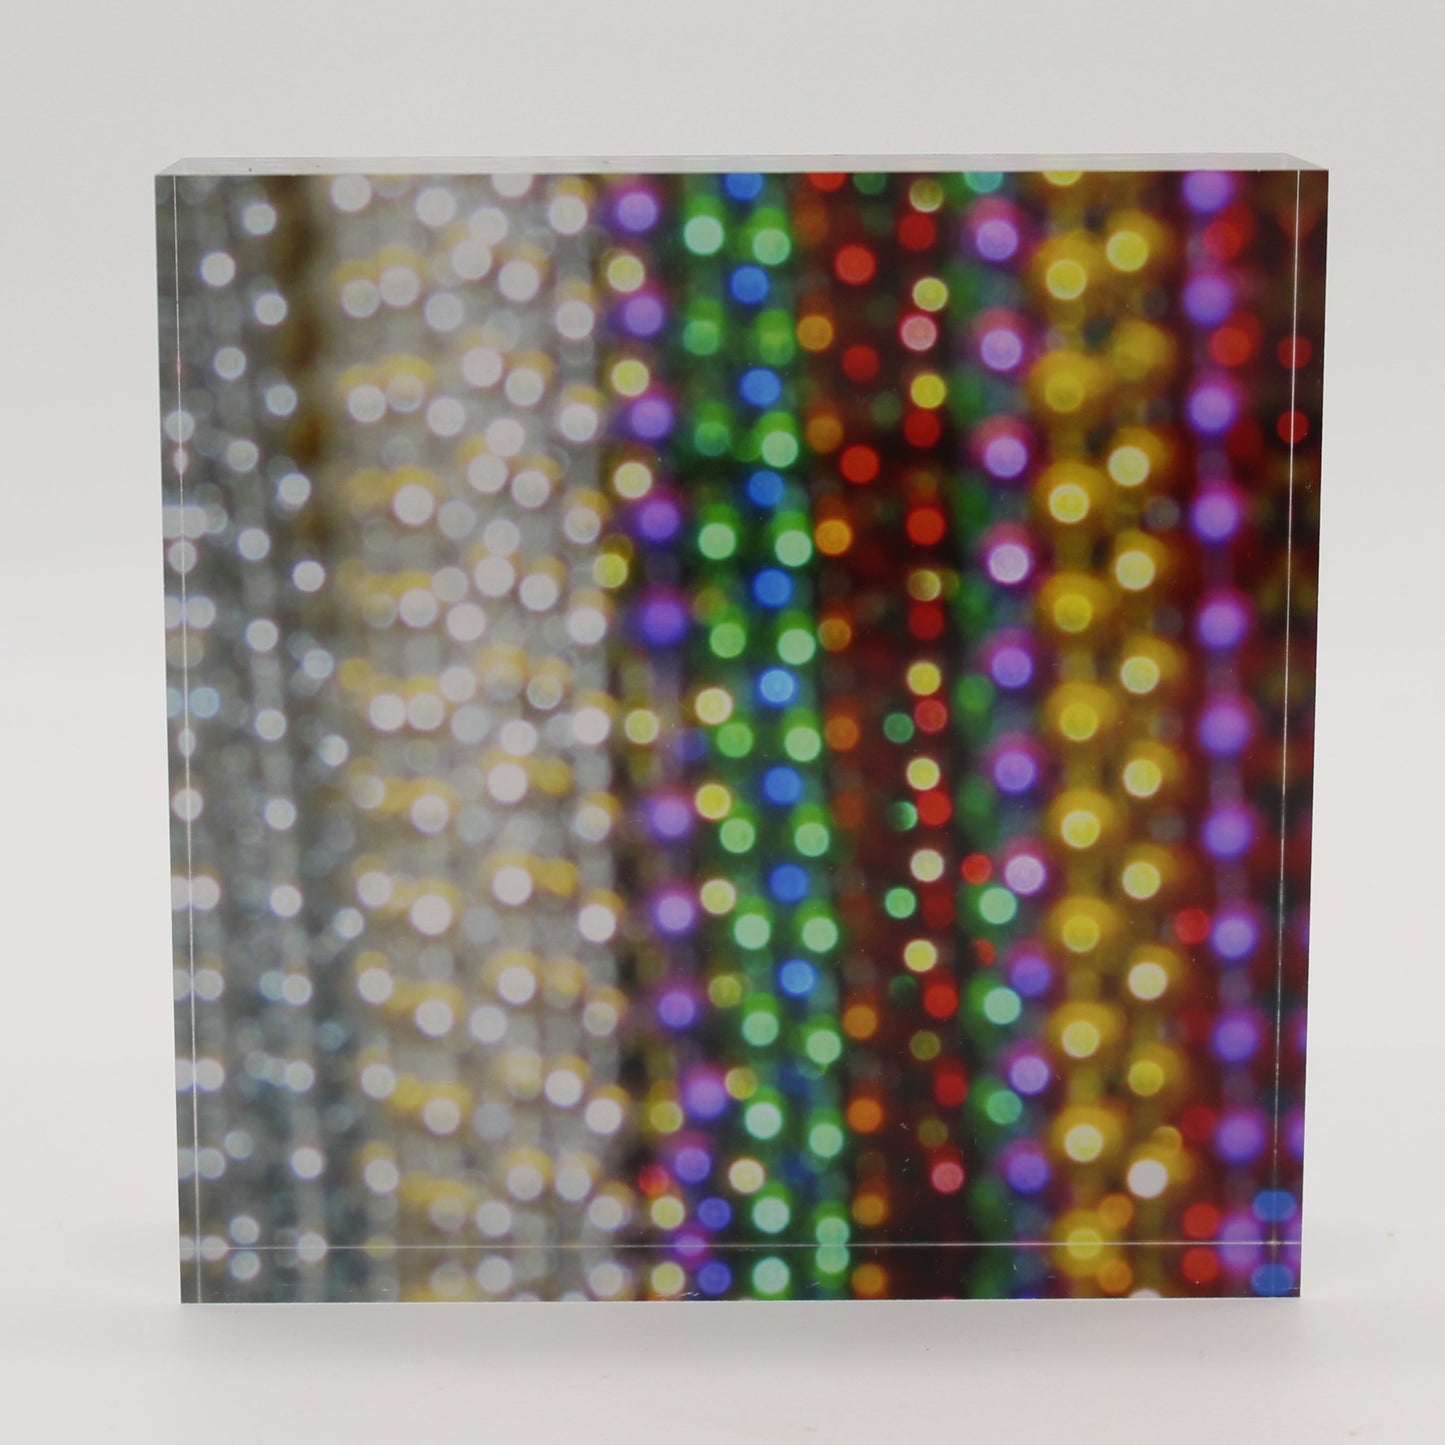 Acrylic block depicting close up view of bead strands